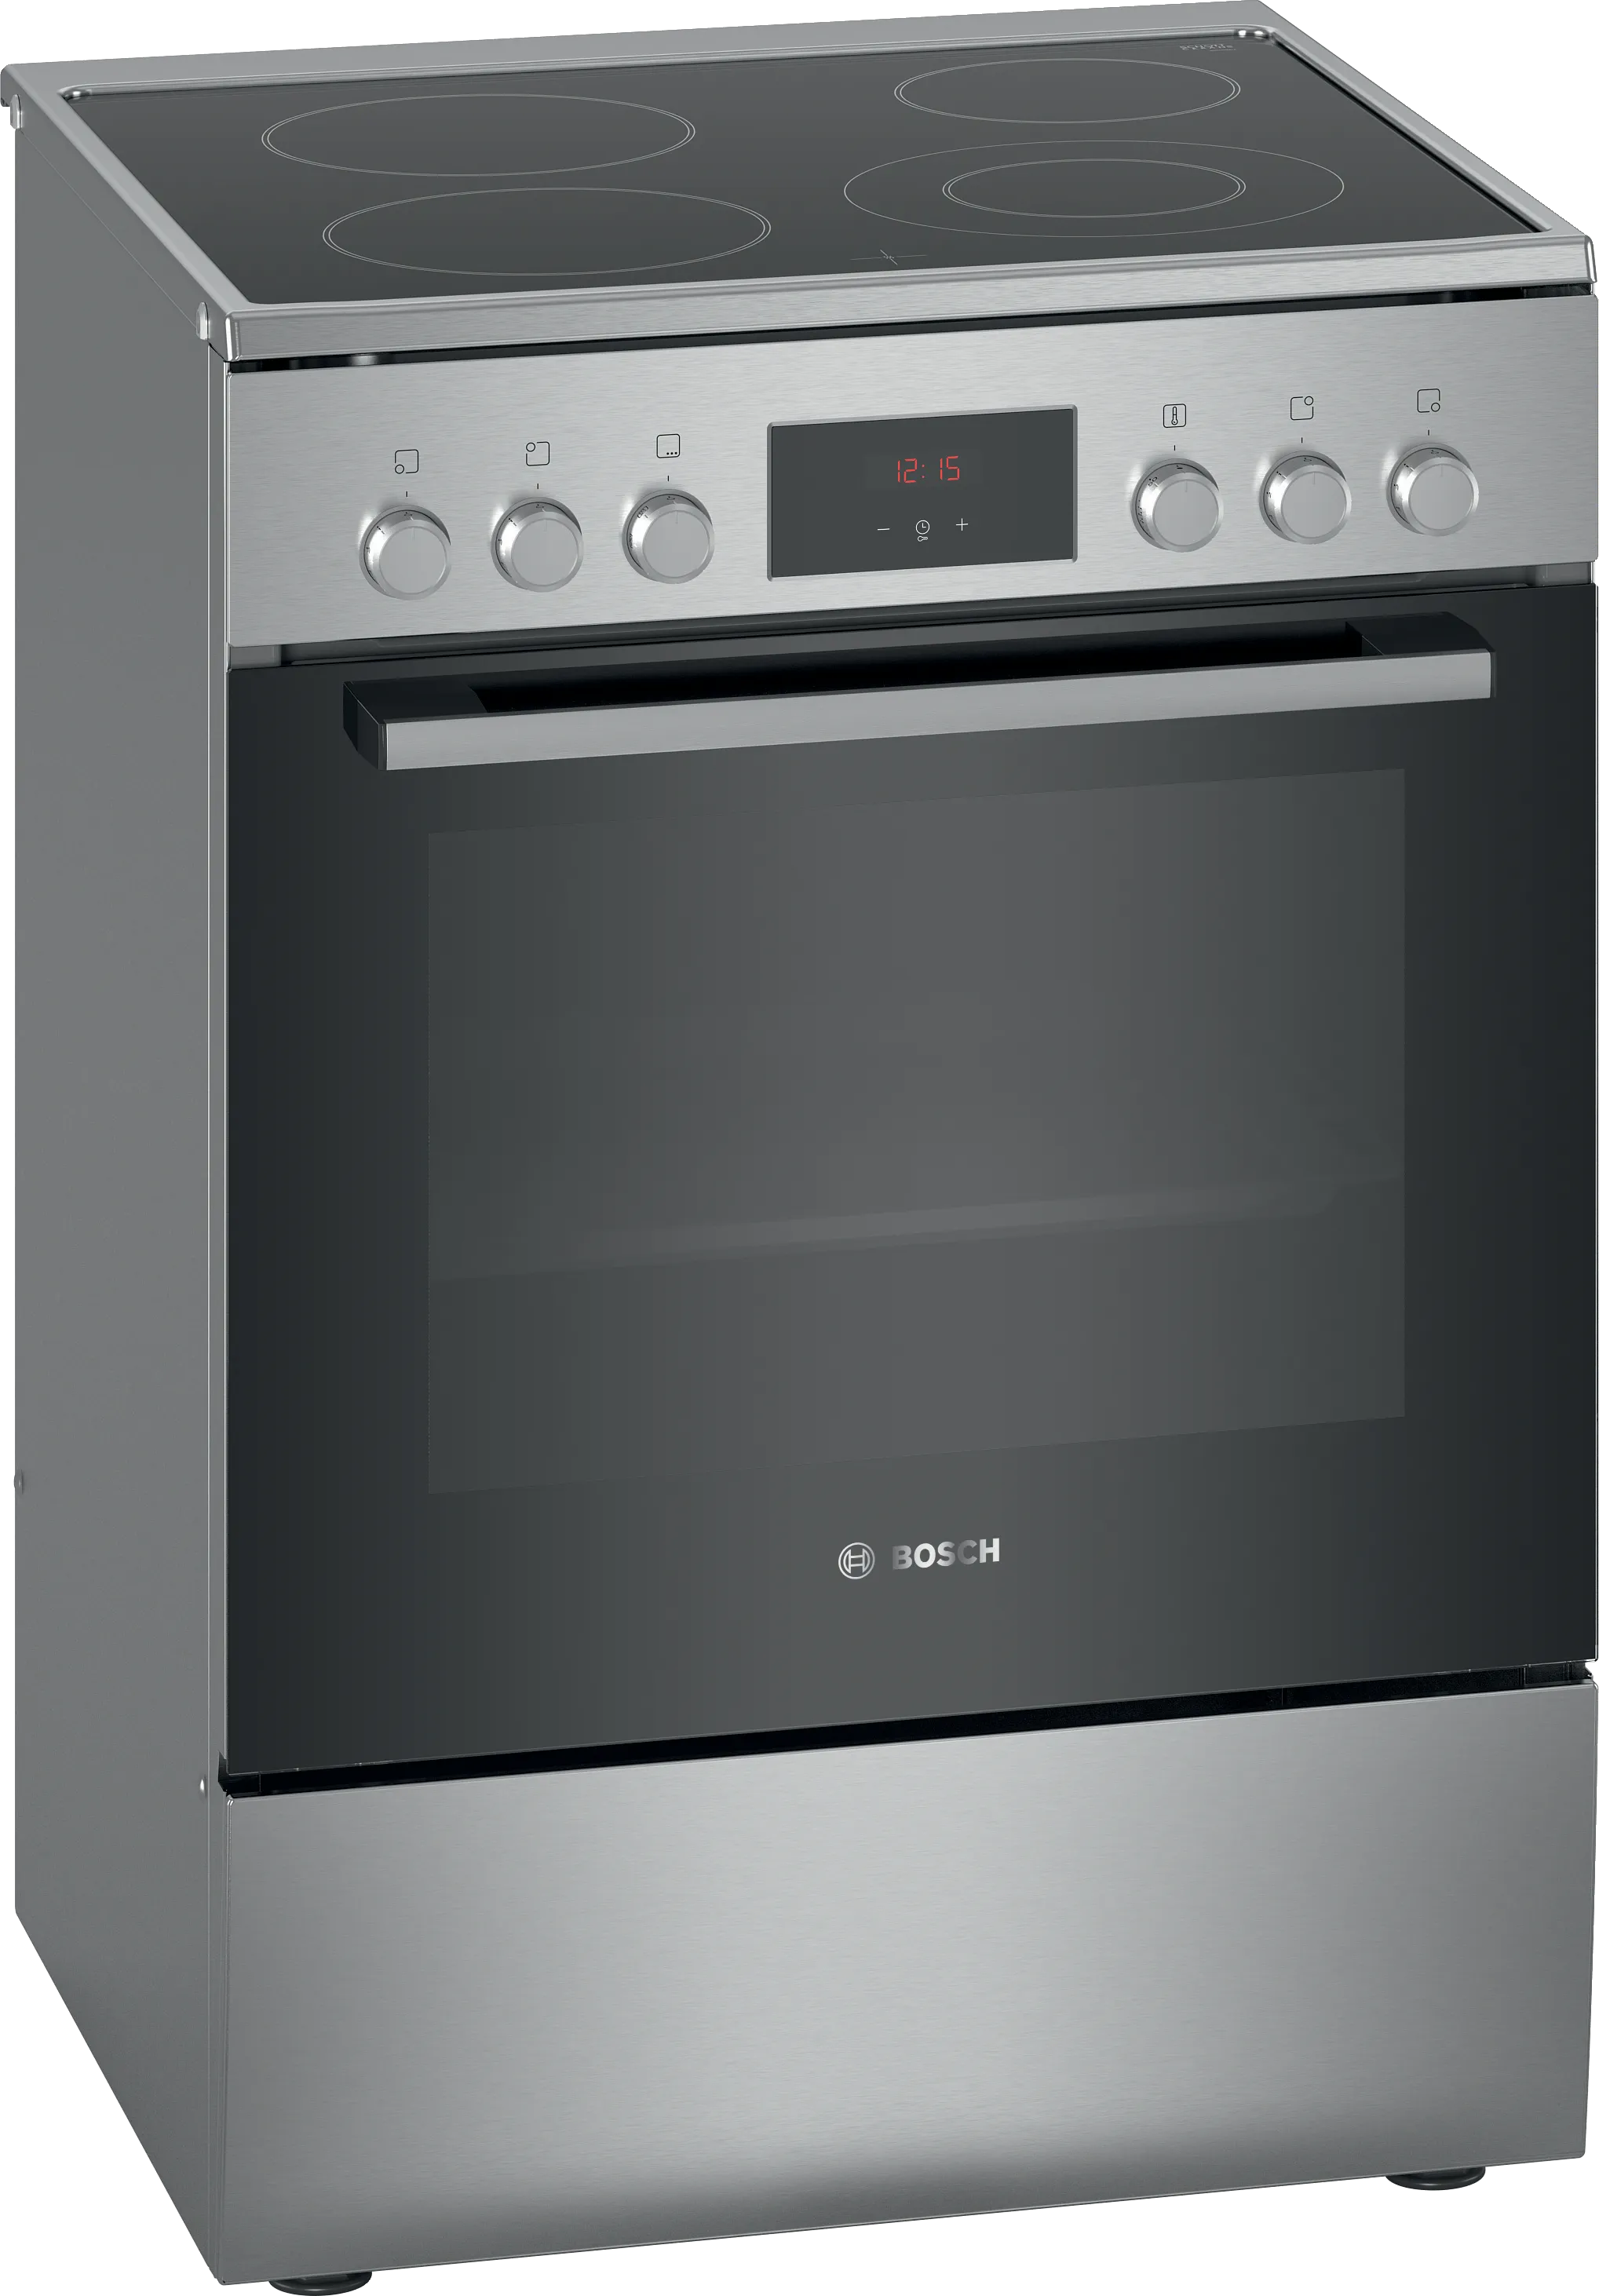 Series 4 free-standing electric cooker Stainless steel 